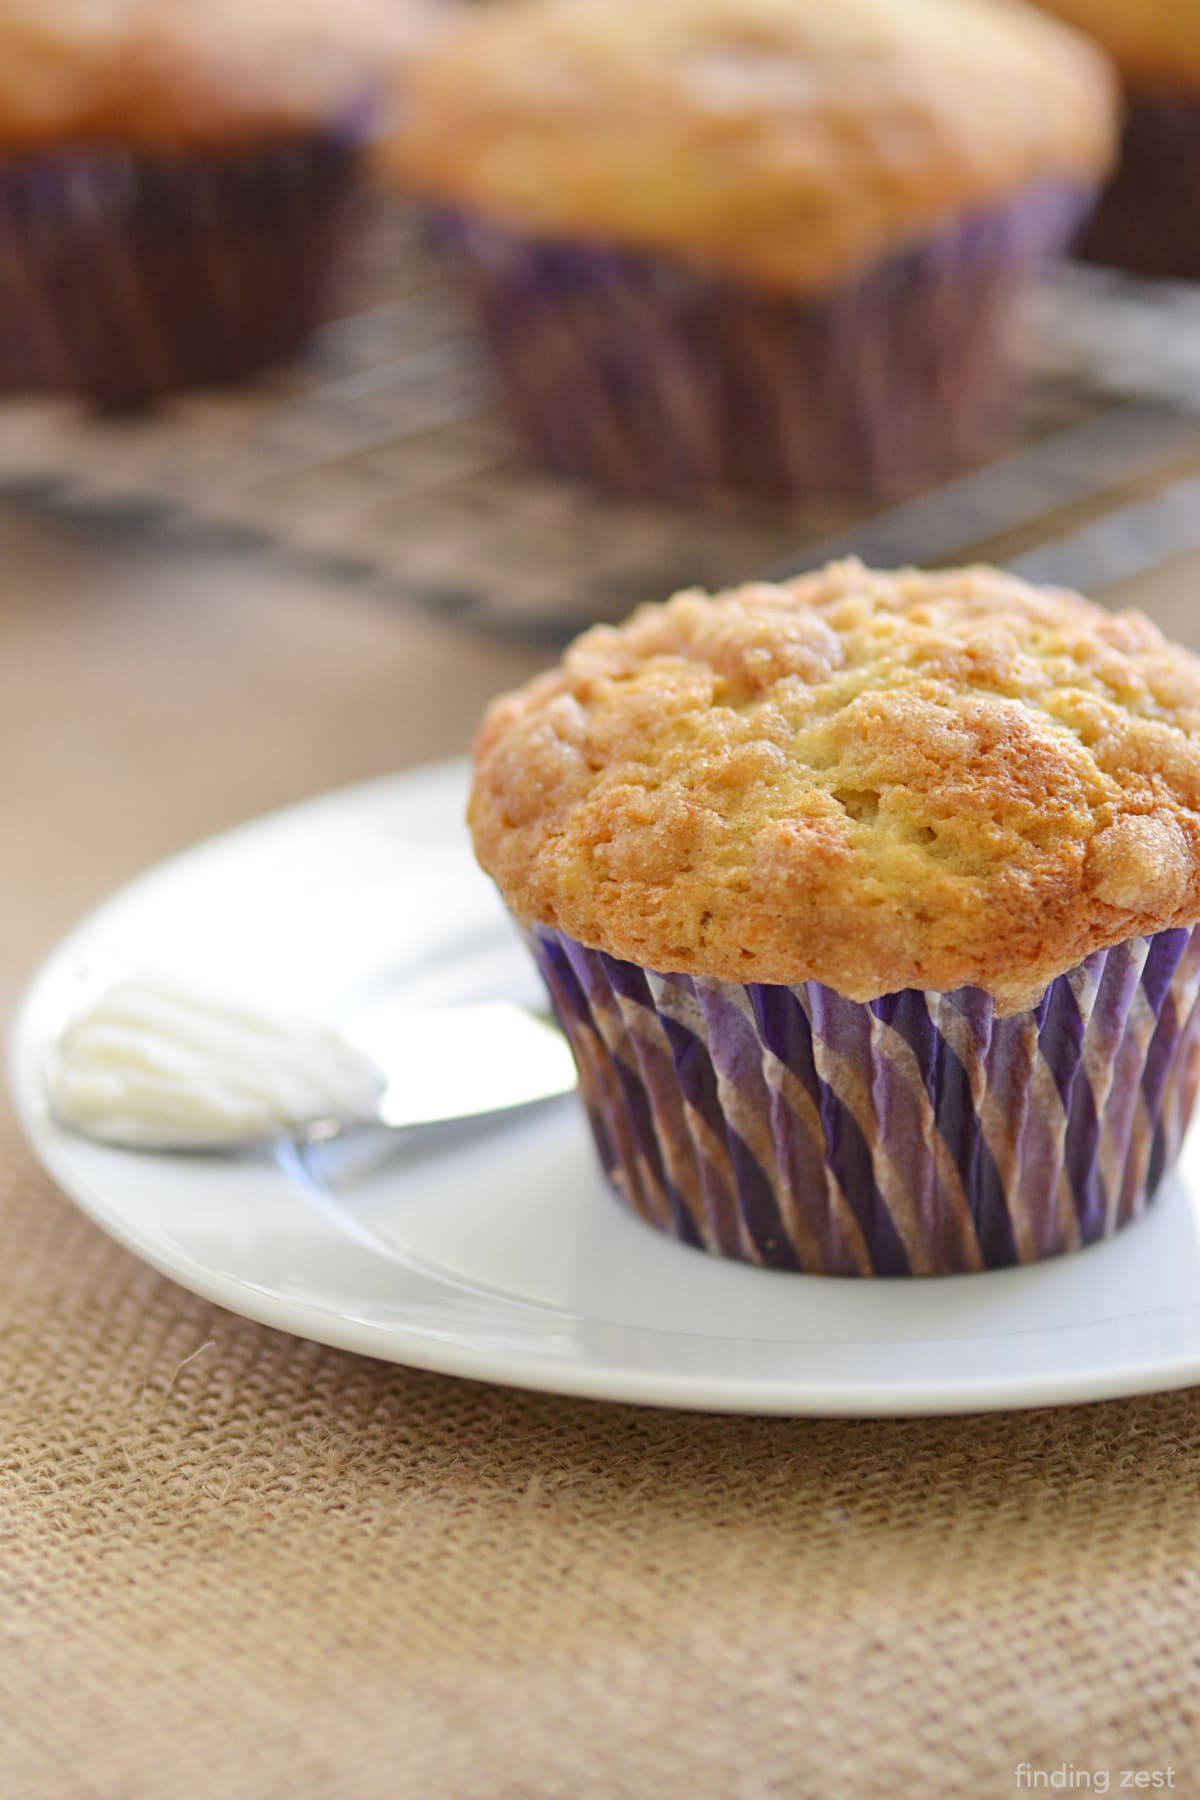 These banana crumb muffins are easy to make, moist, and delicious. The perfect breakfast for when you want something a little bit special. The crumb topping is so good!!!